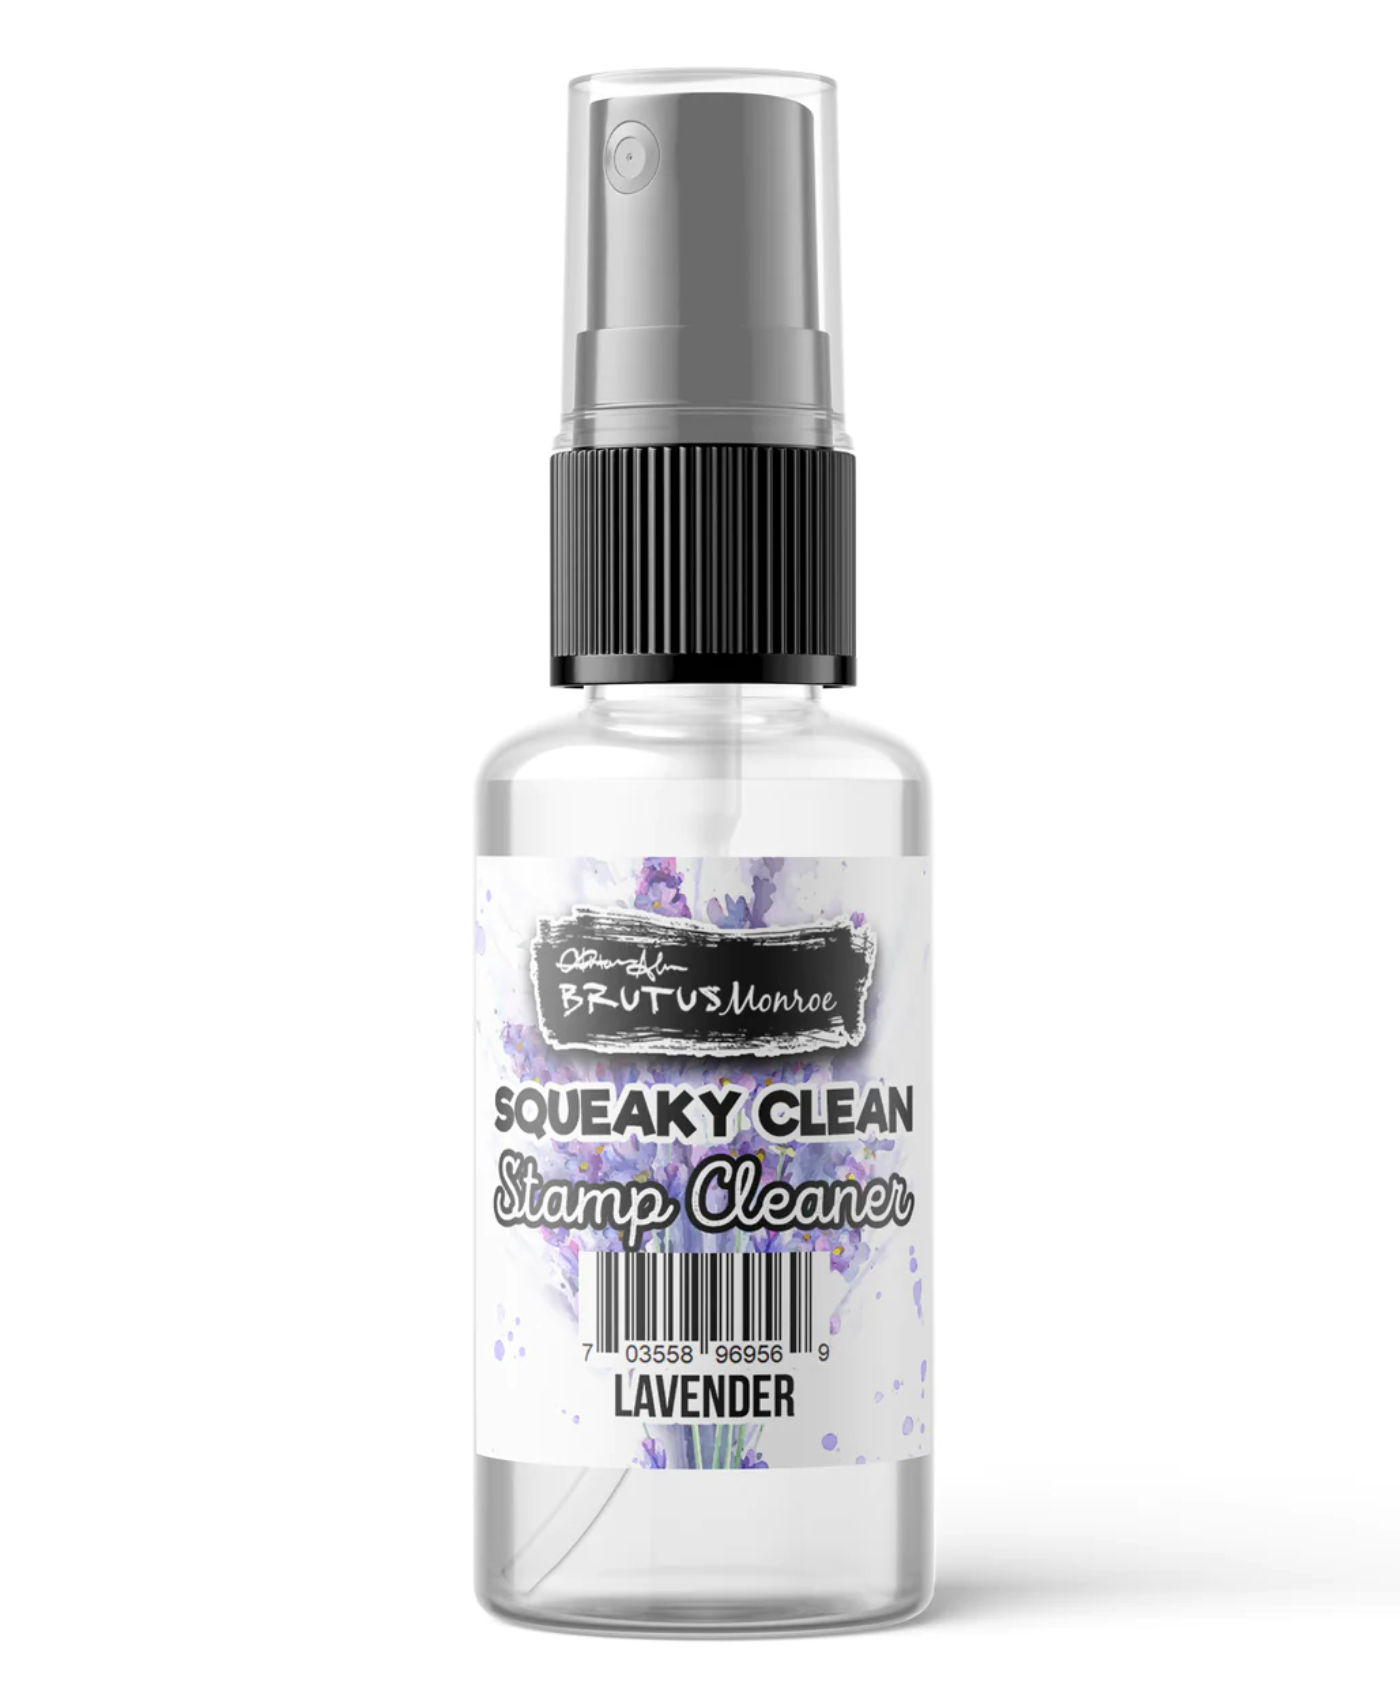 Rubber Stamp Cleaner